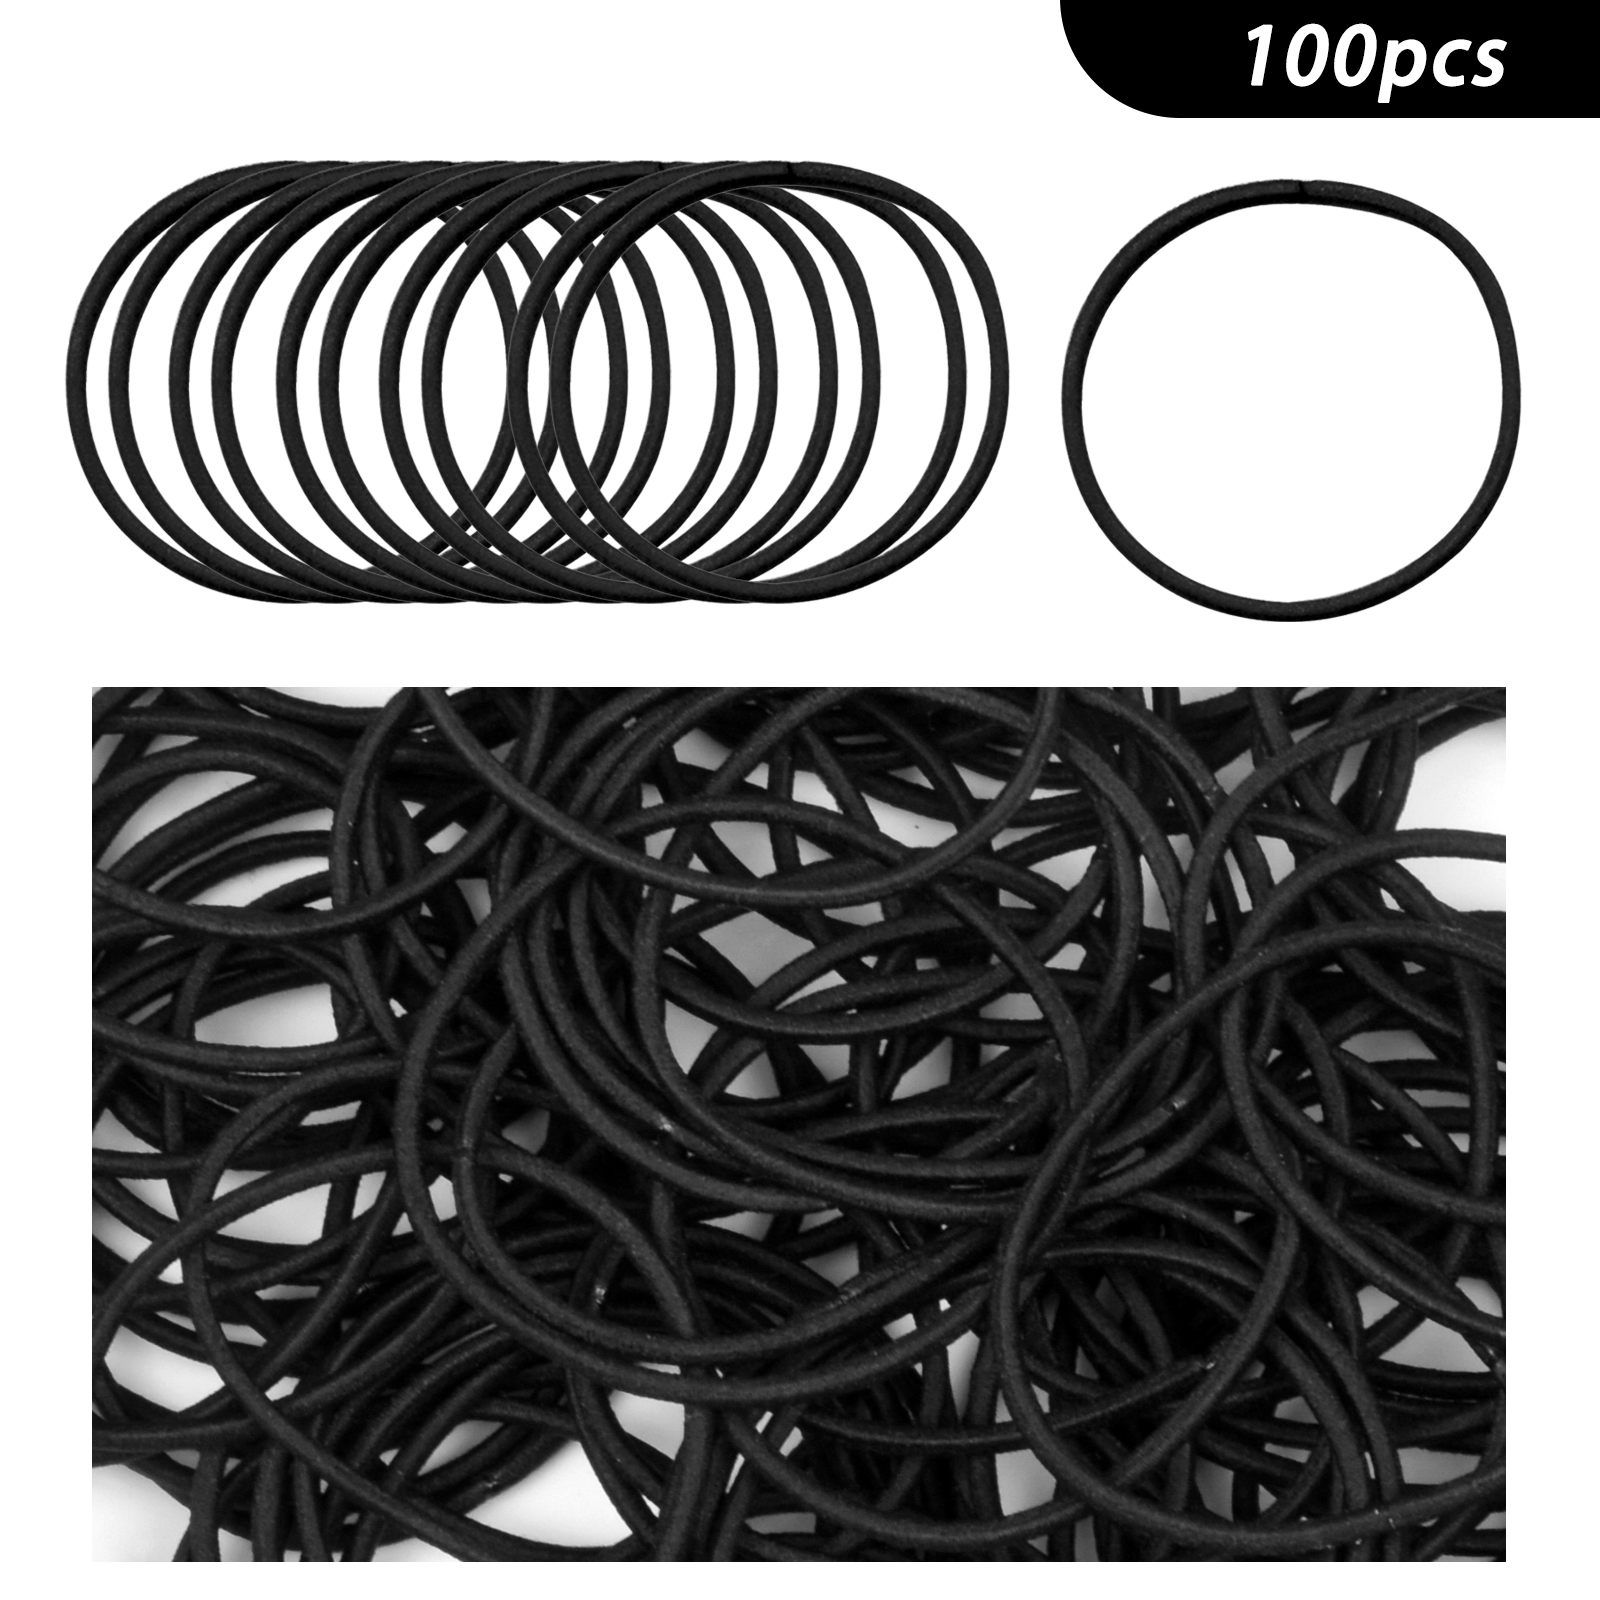 

100pcs Black Elastic Hair Tie Thin Rubber Bands, Ponytail Holders, Hair Accessories For Women